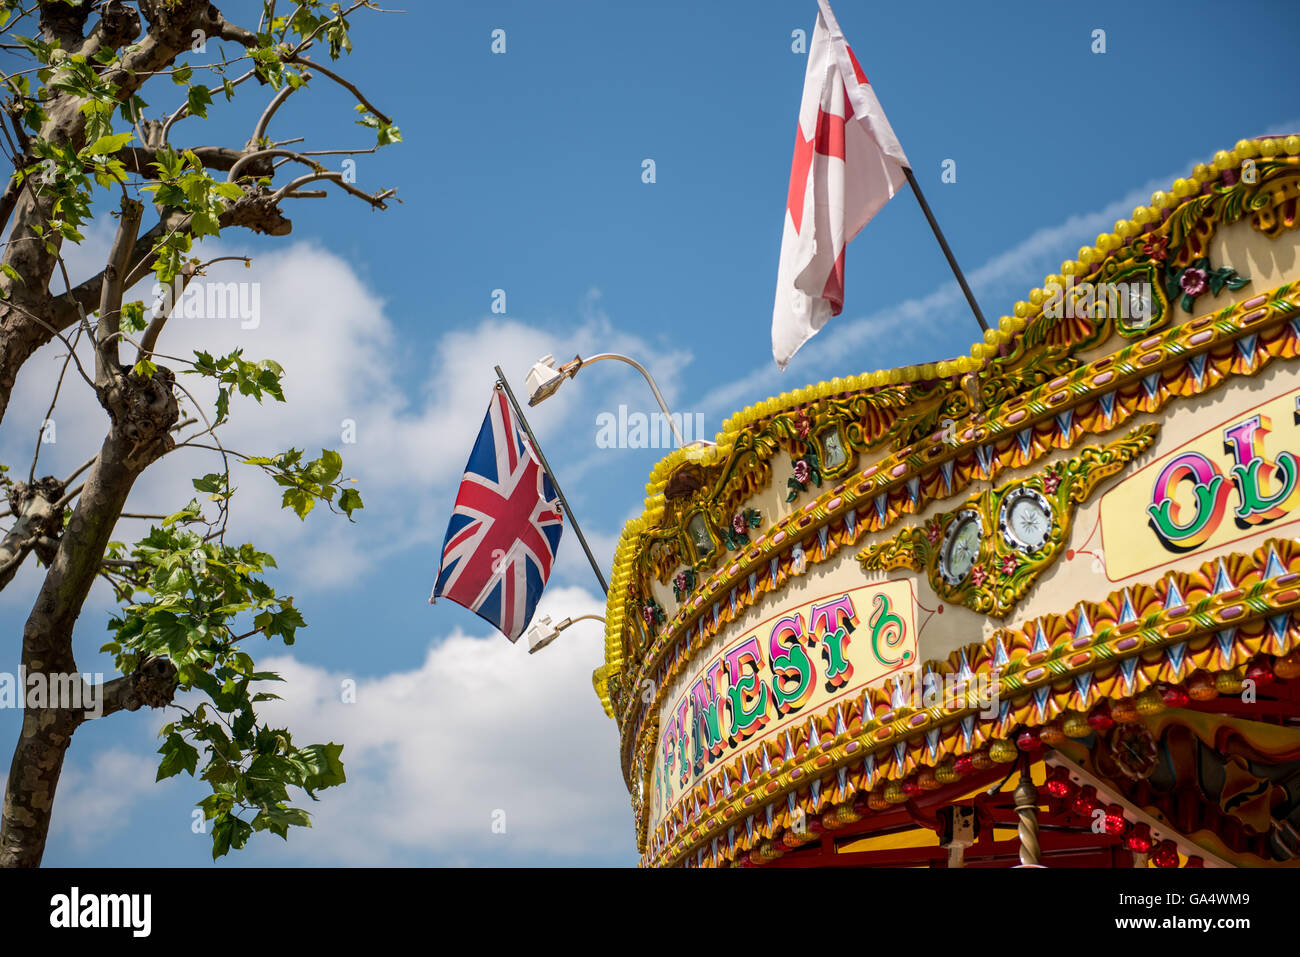 Fairground carousel ride with Union Jack and St George cross flags flying from its rim Stock Photo